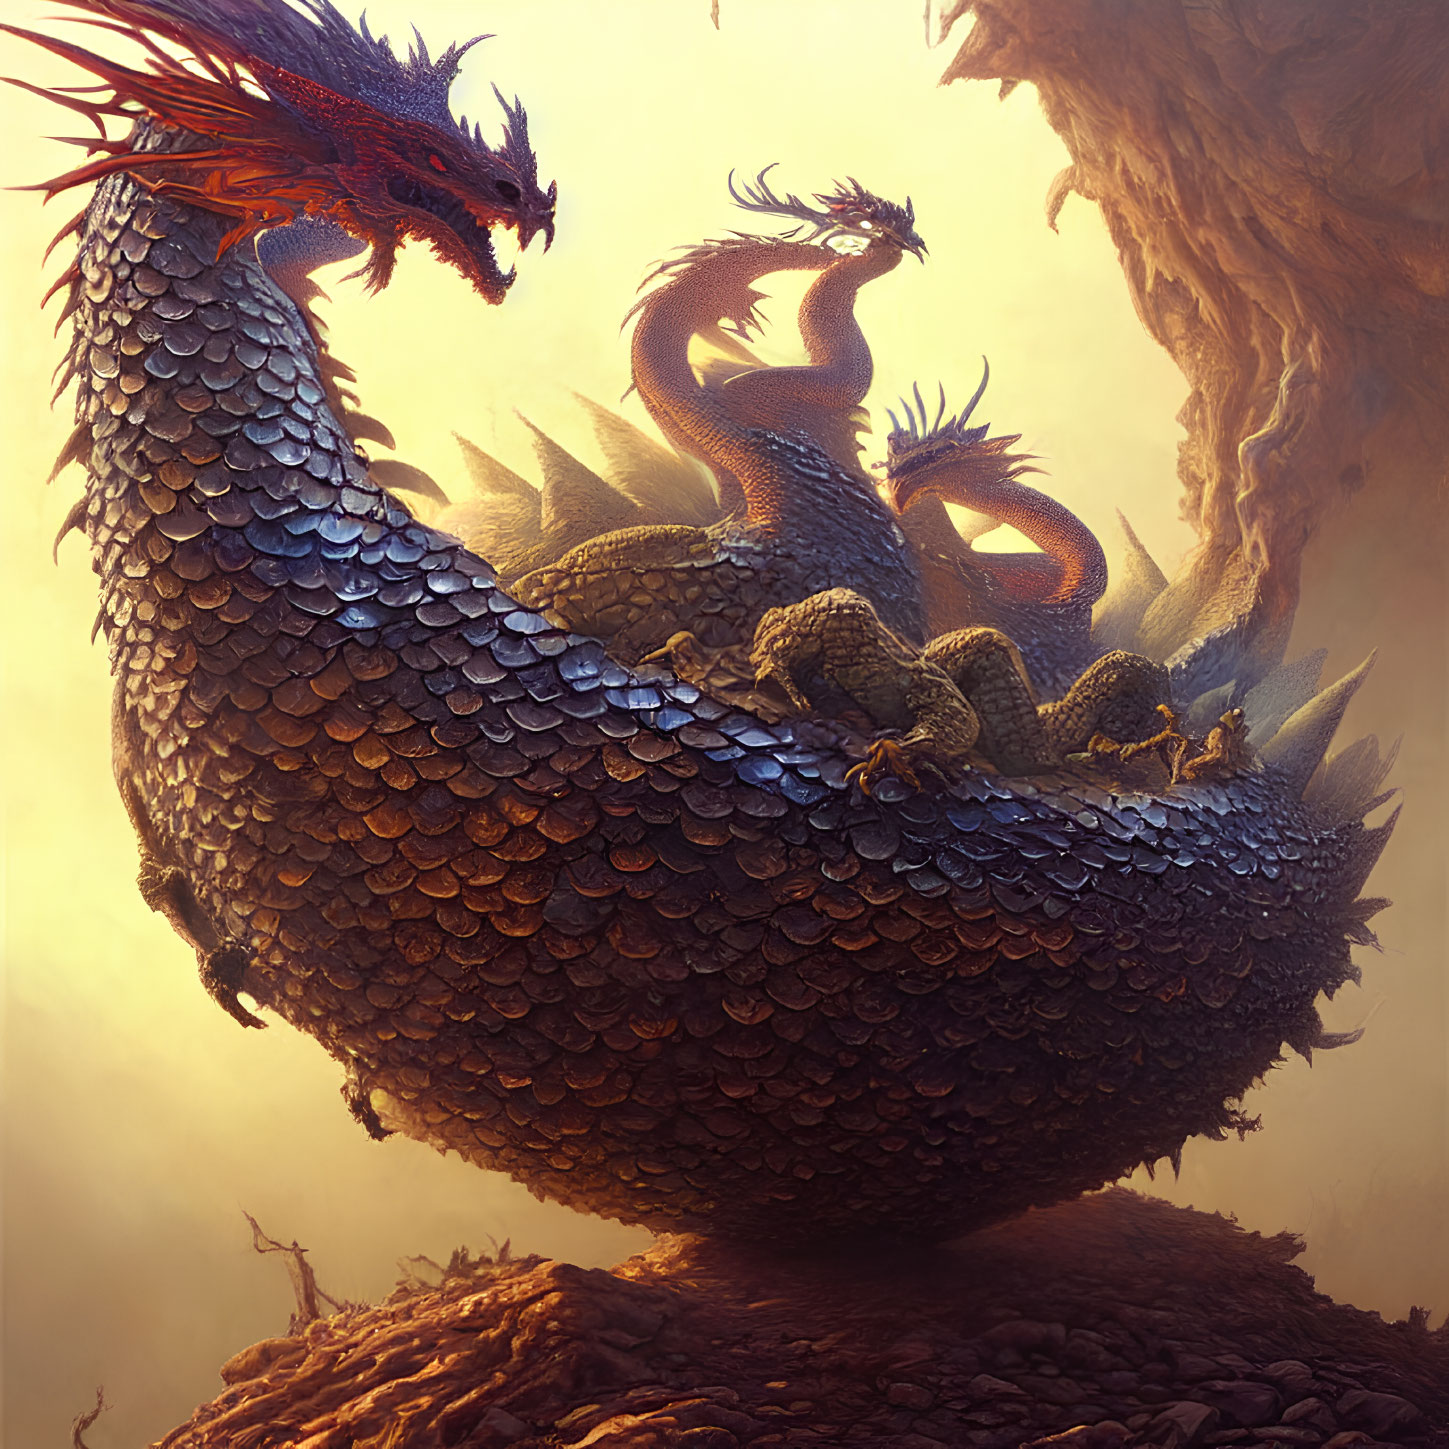 Majestic multi-headed dragon on rocky terrain with gleaming scales